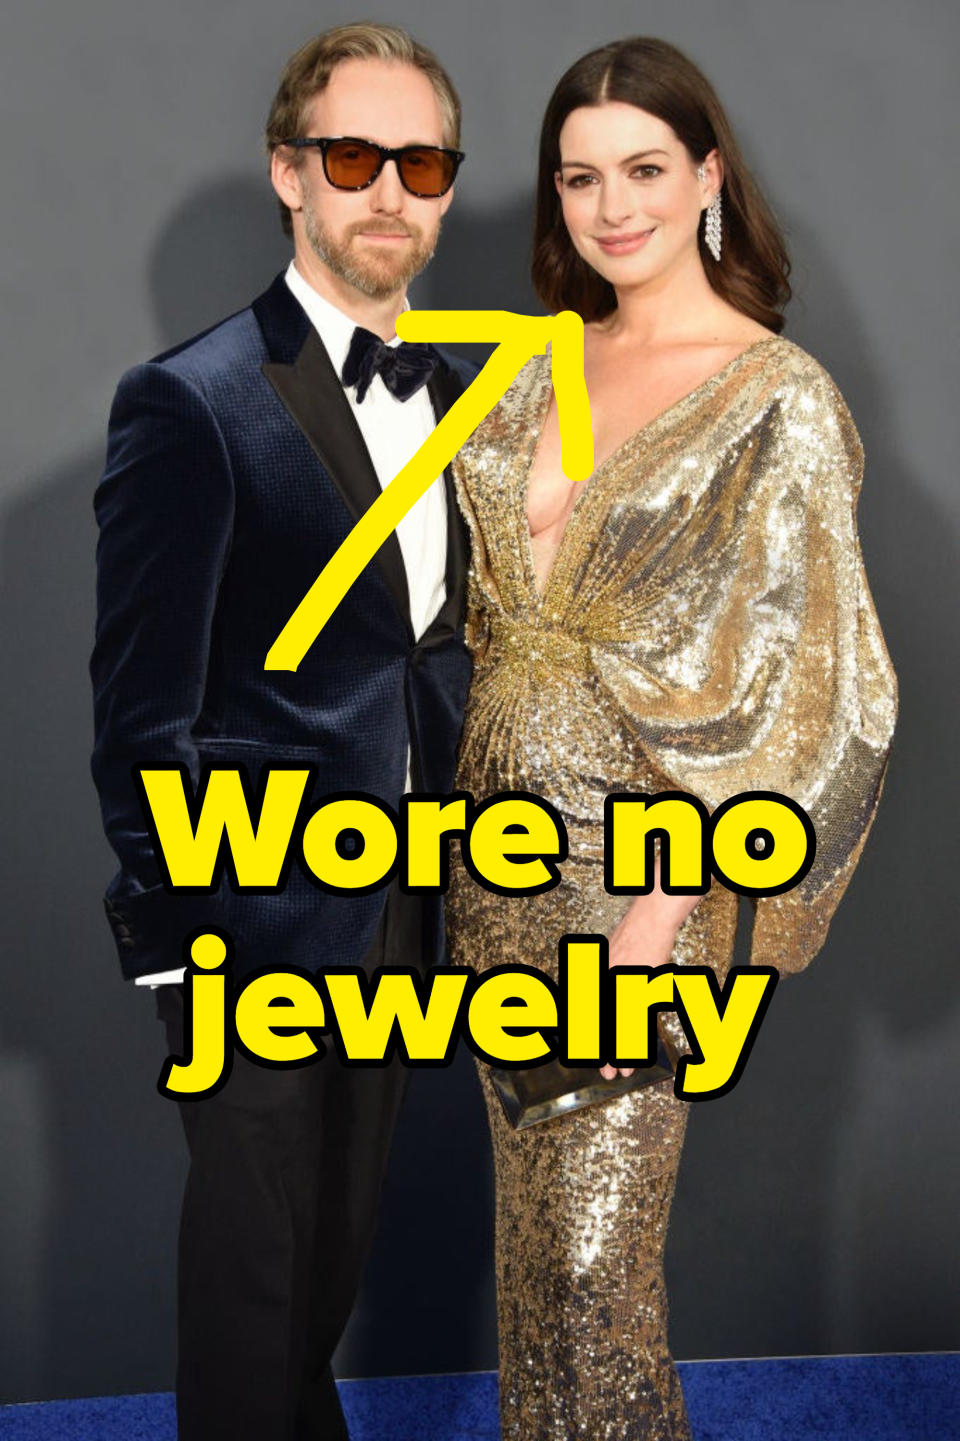 Picture of Anne Hathaway and Adam Shulman at a red carpet with text pointing at Hathaway reading "wore no jewelry"